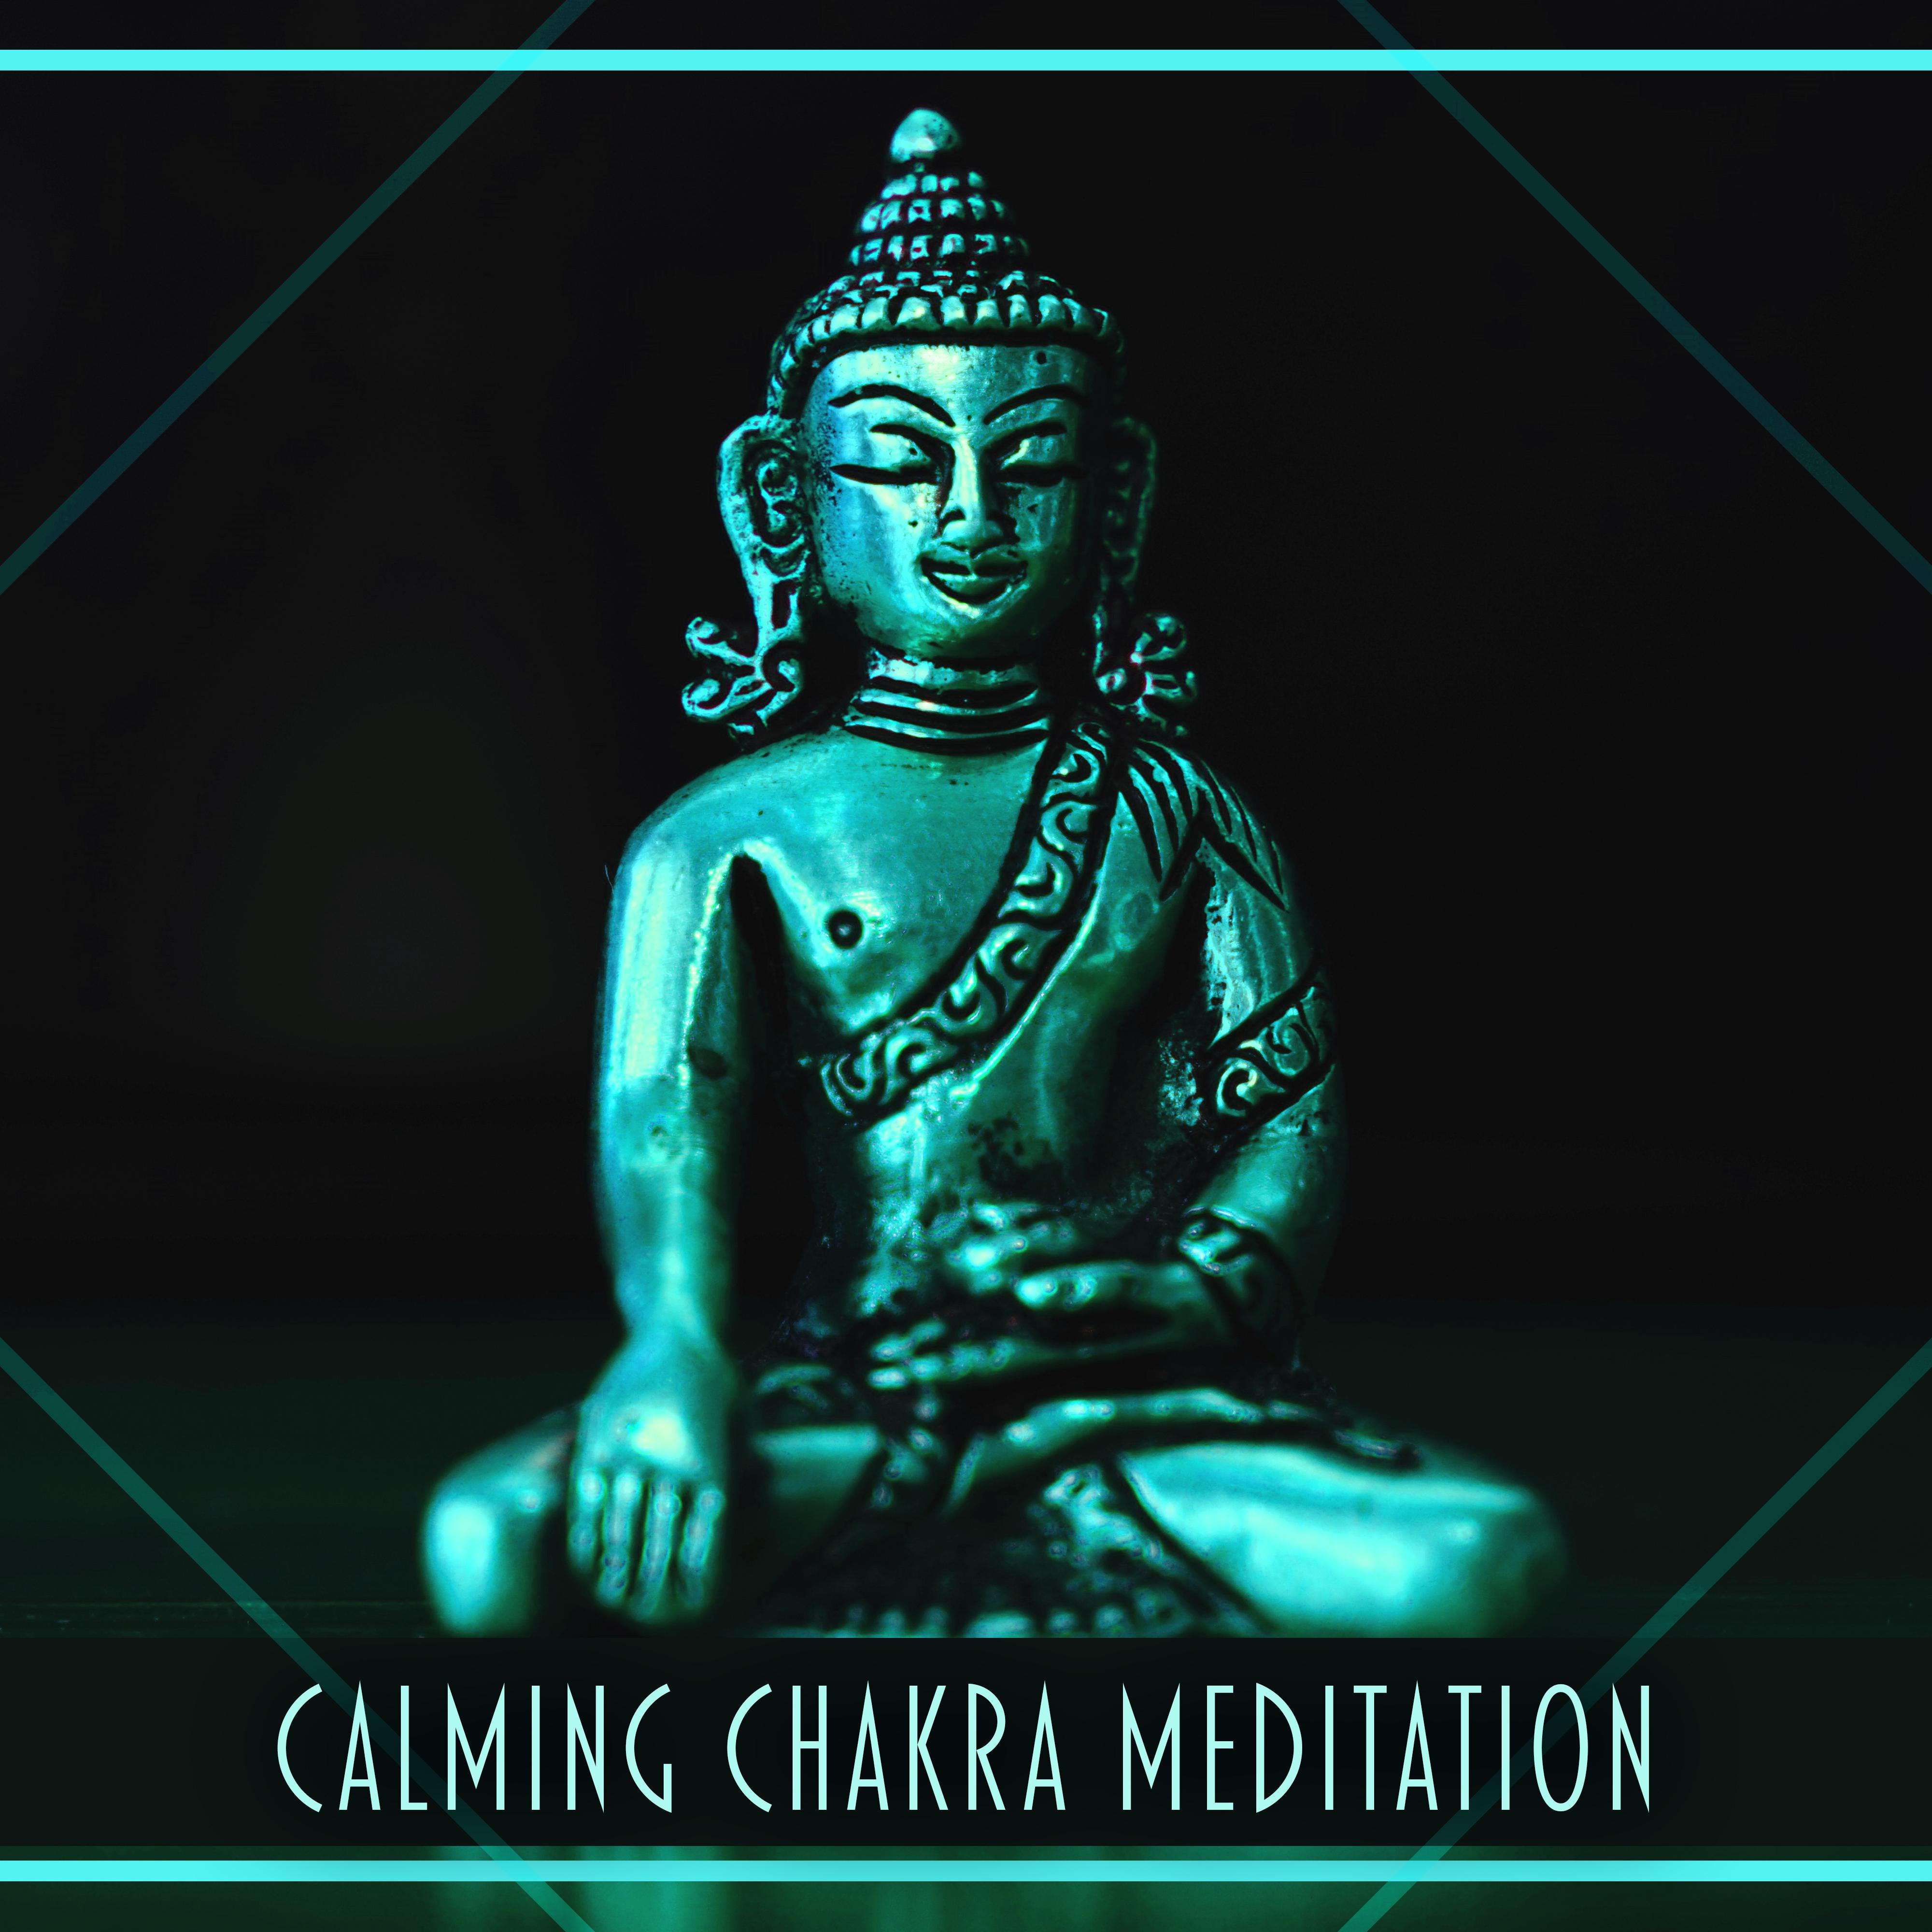 Calming Chakra Meditation  Music for Calm Meditation, Deep Breathing, Healing Soul, Calm and Soothing Sounds